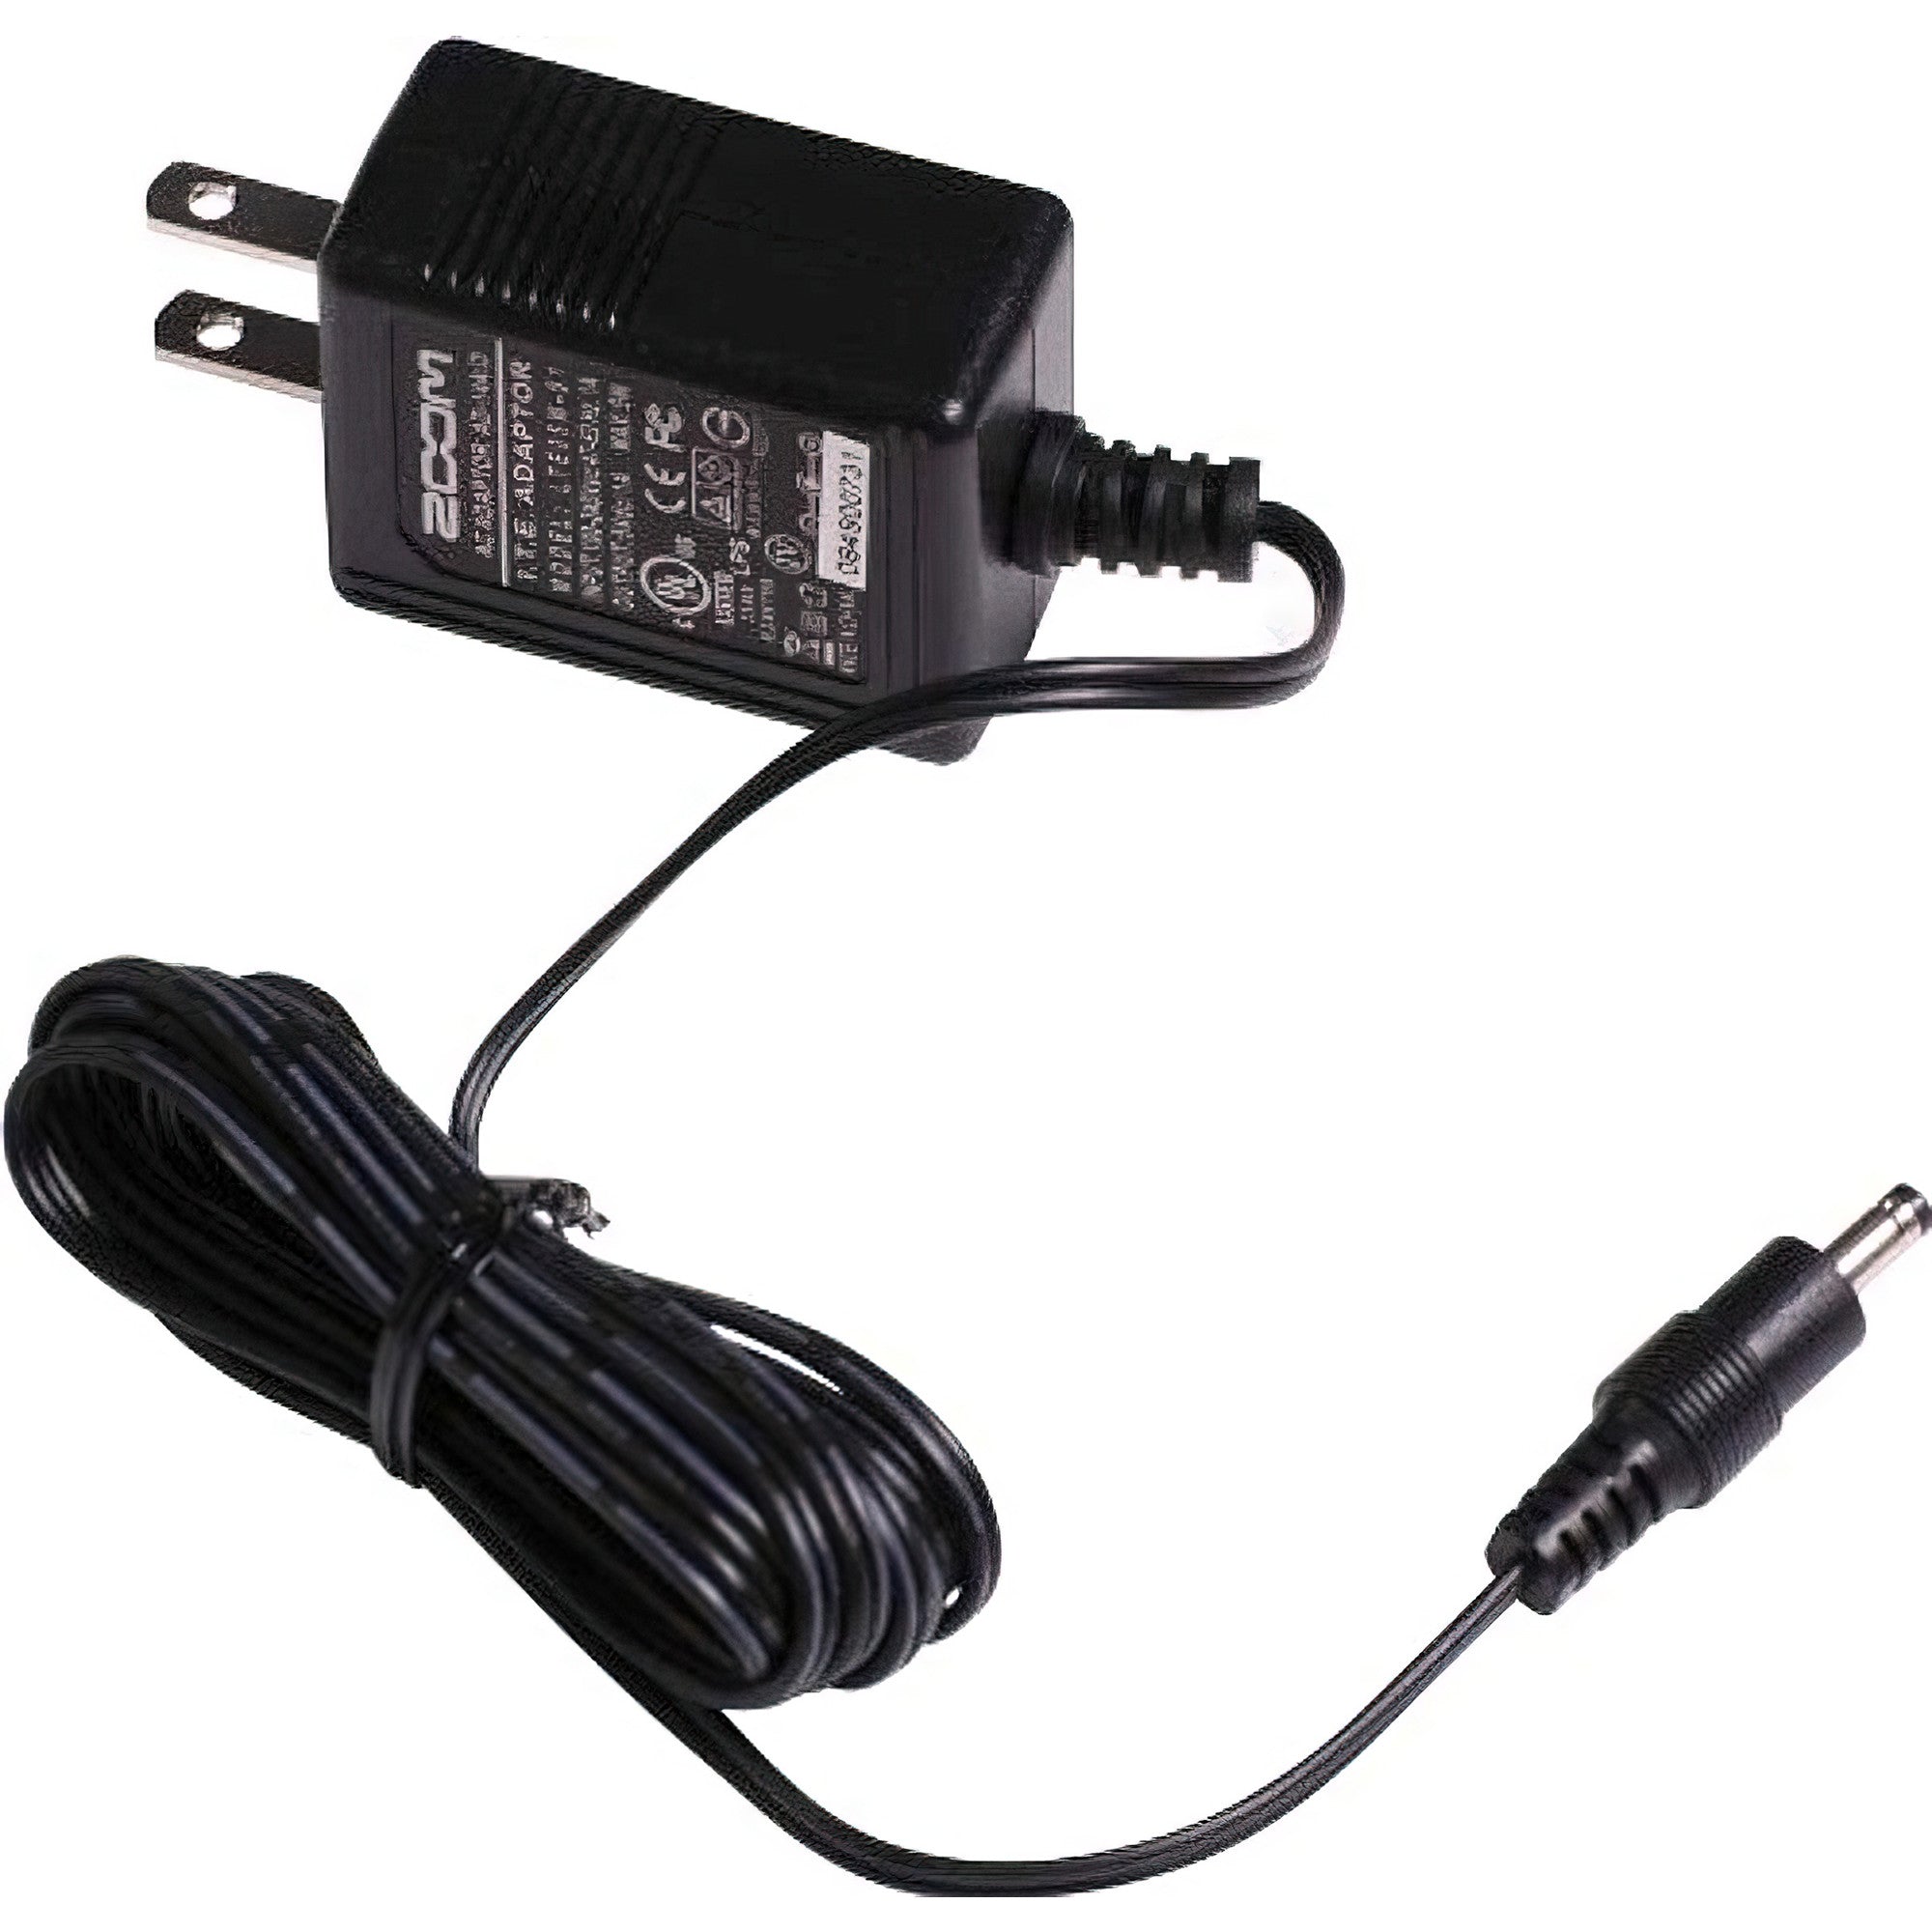 Zoom, Zoom AC Adapter, 5V AC Power Adapter Designed for Use with H4n, H4n Pro, ARQ AR-96, AR-48, UAC-2, R16, and R24